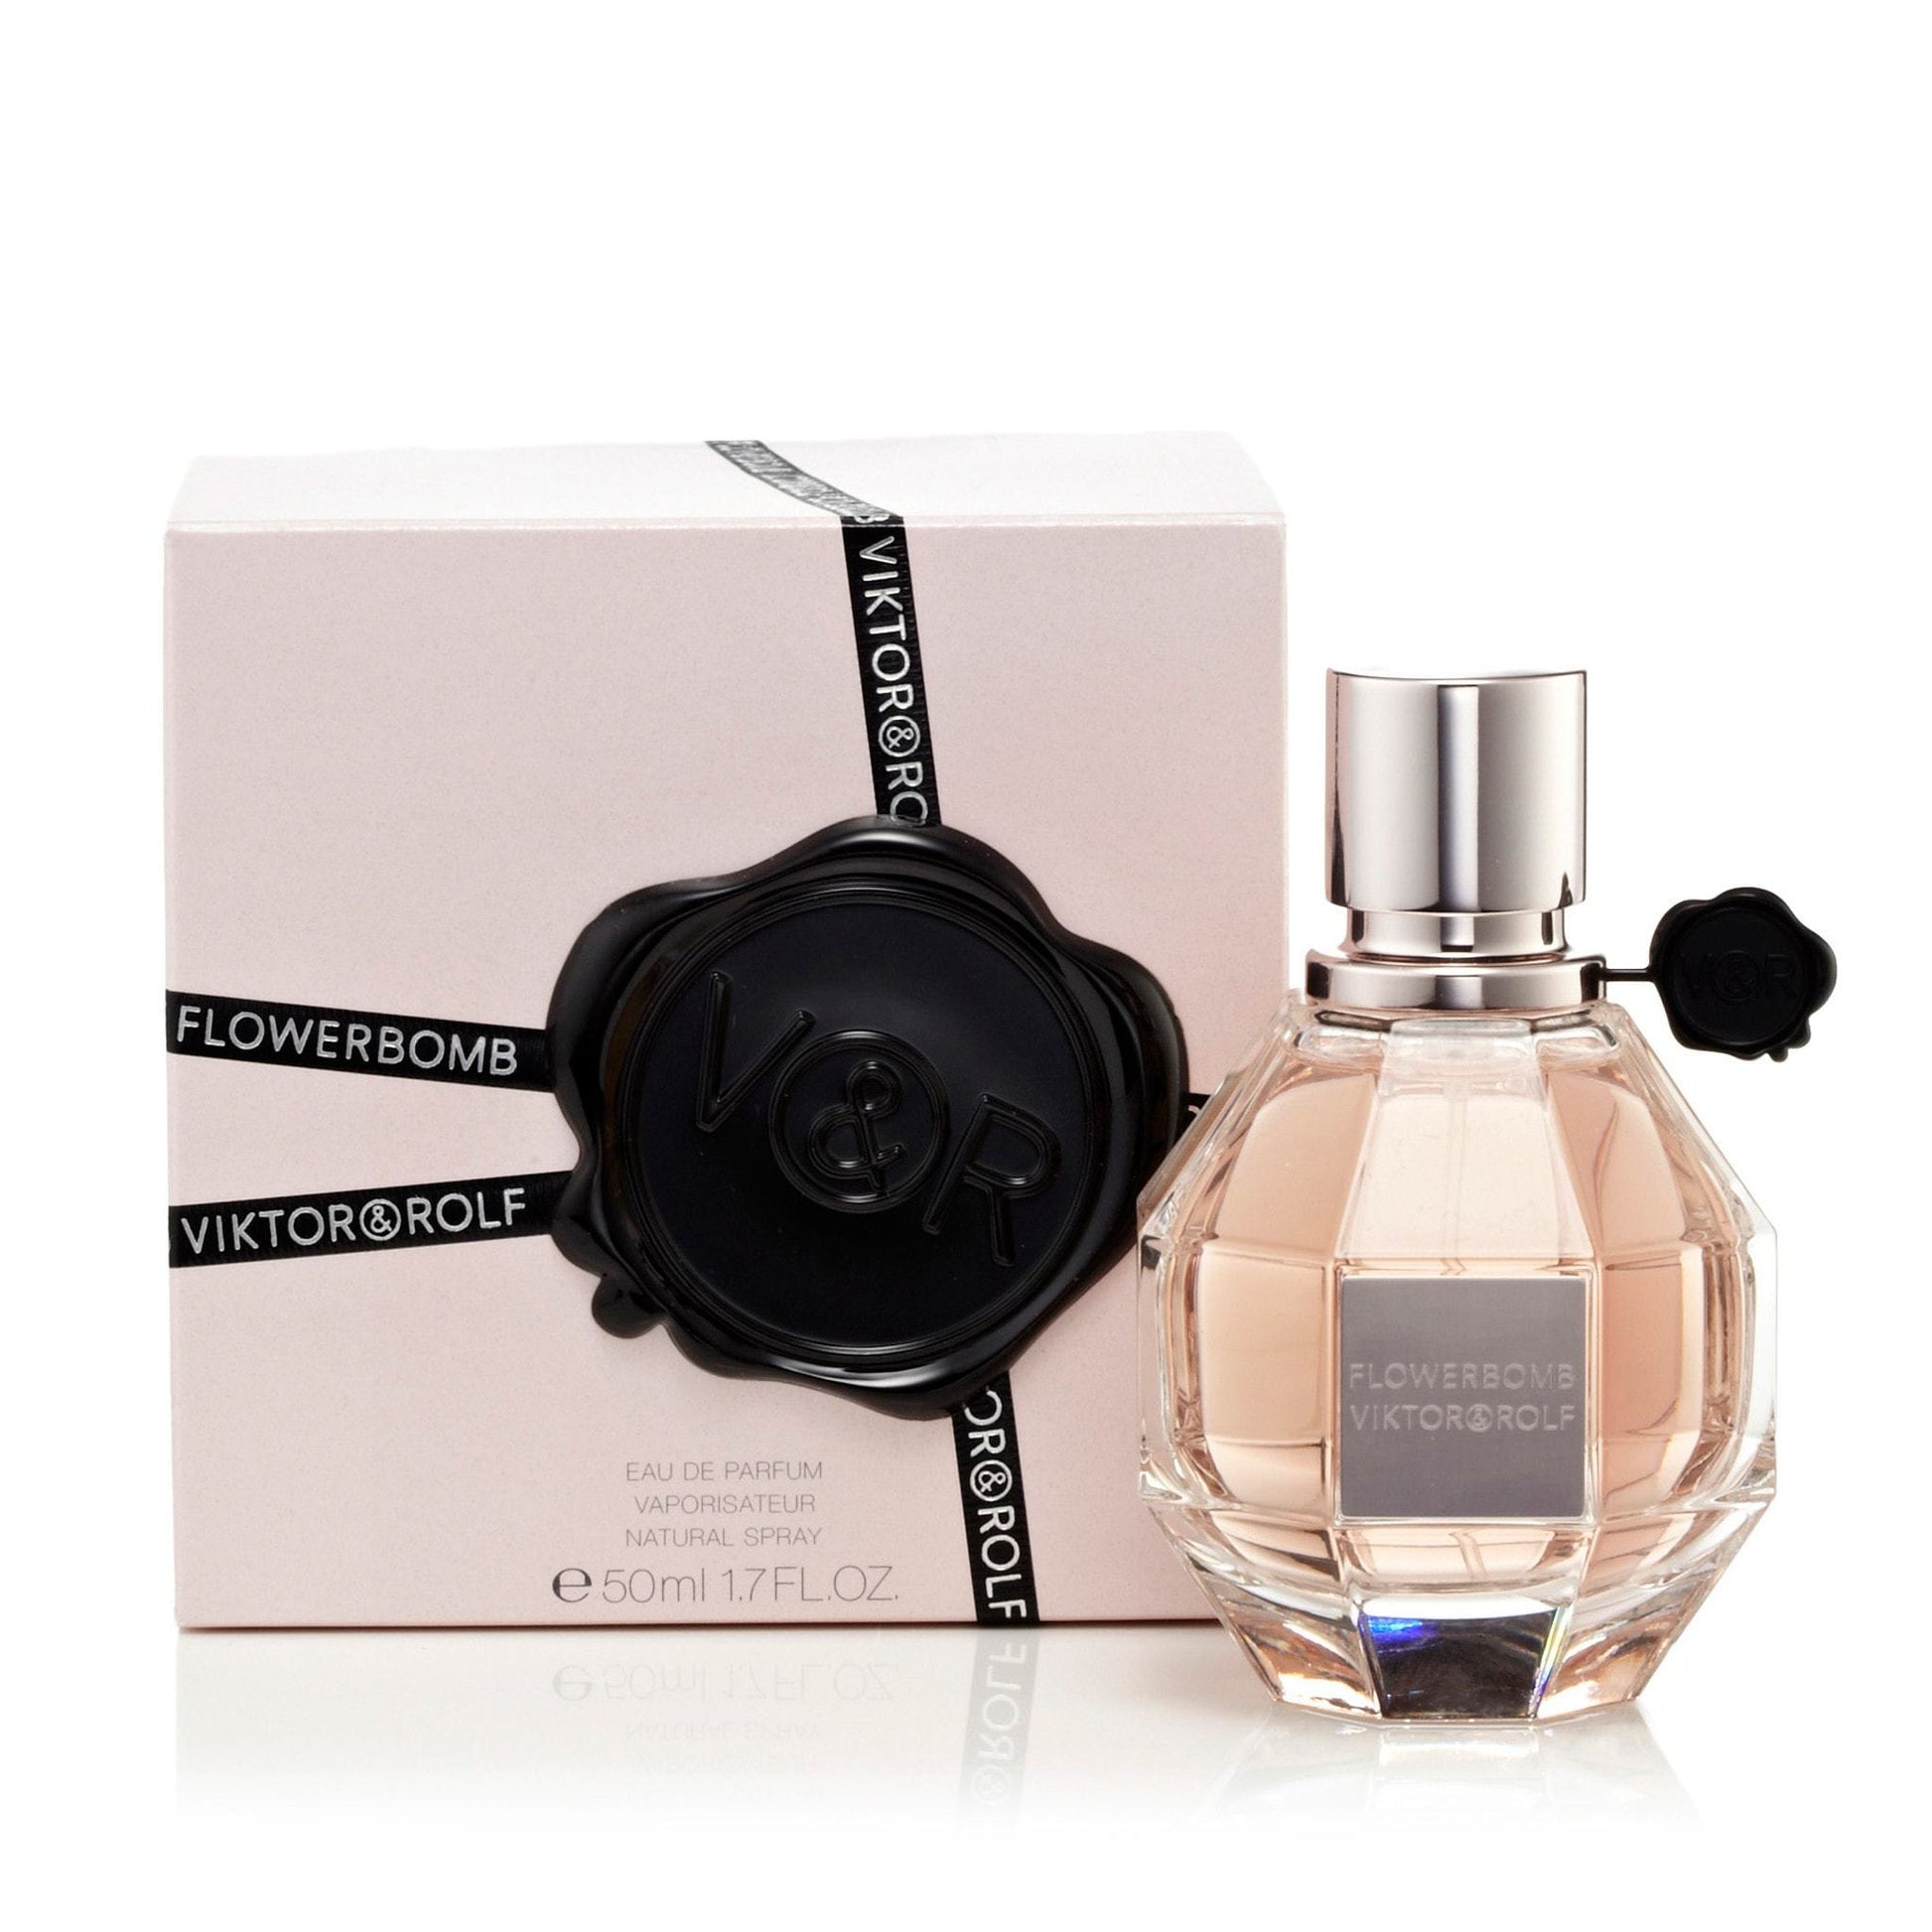 Flowerbomb EDP for Women by Viktor & Rolf, Product image 7